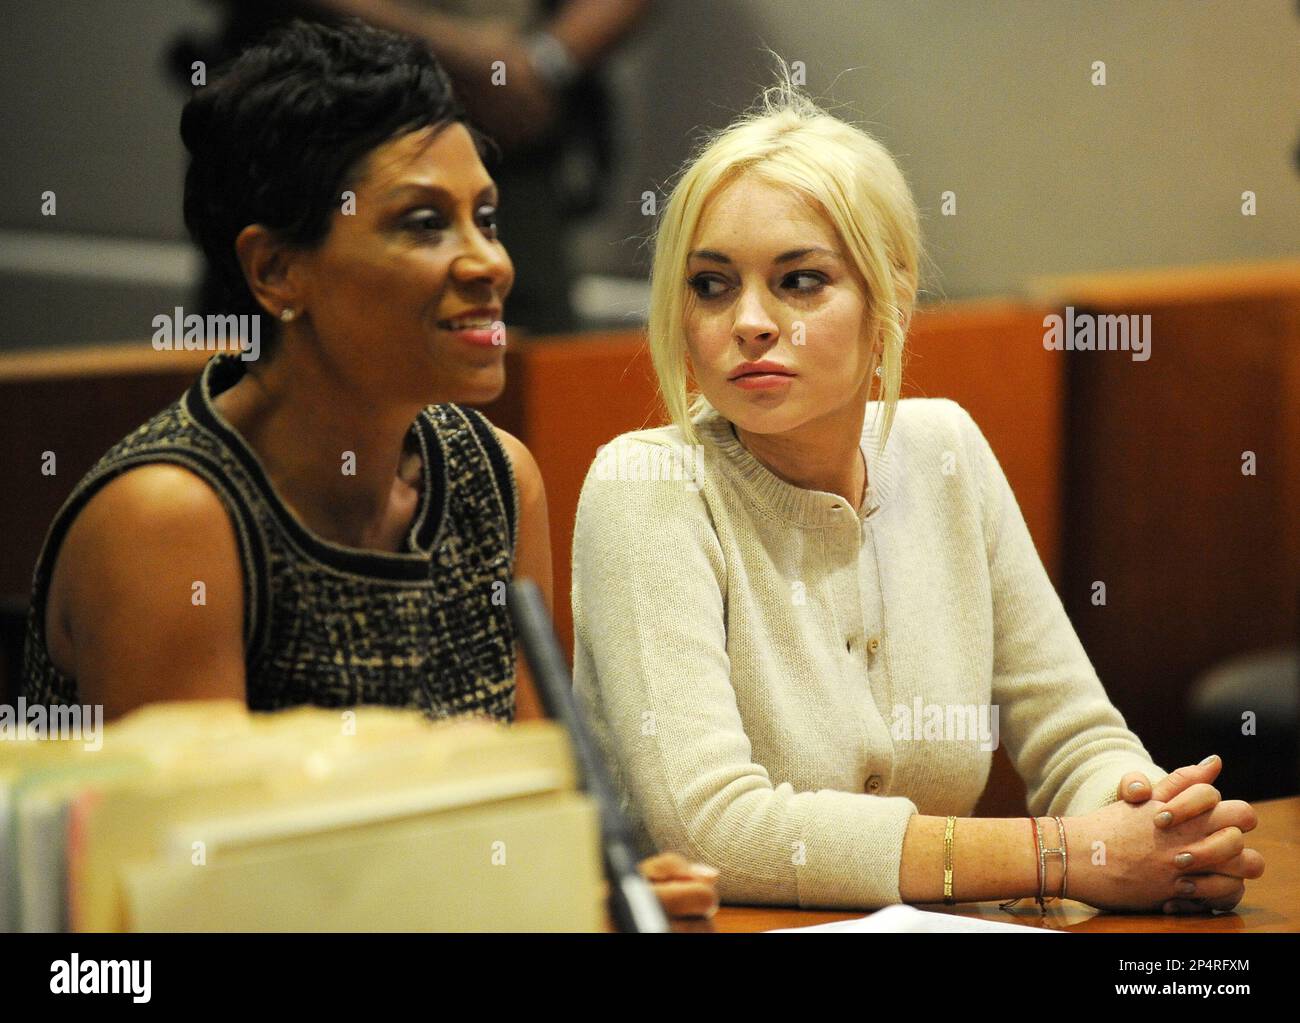 FILE - In this Dec. 14, 2011 file photo, Lindsay Lohan, right, alongside her attorney Shawn Chapman Holley appear during a progress report session at the Los Angeles Superior Court, in Los Angeles. A star of Disney films whose acting received early praise and attention, Lohan’s 2007 two arrests for DUI and drug possession still haunts the actress today. While the 27-year-old has put those cases behind her, she remains on probation for a necklace theft case and lying to police about her role in a crash on Pacific Coast Highway. (AP Photo/Michael Nelson, Pool, File) Stock Photo